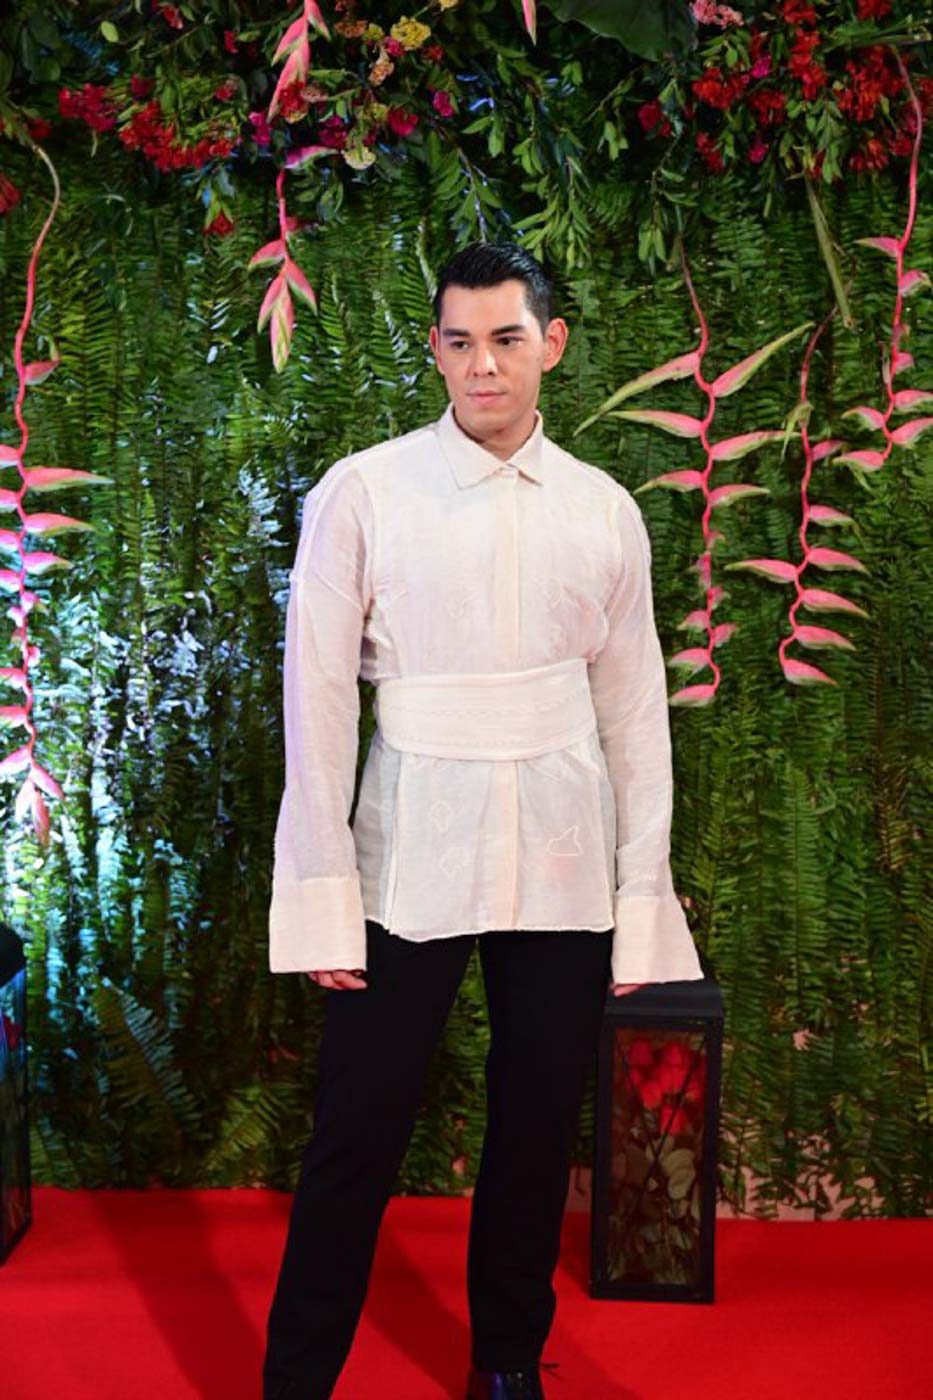 IN PHOTOS: All the looks at the ABS-CBN Ball 2019